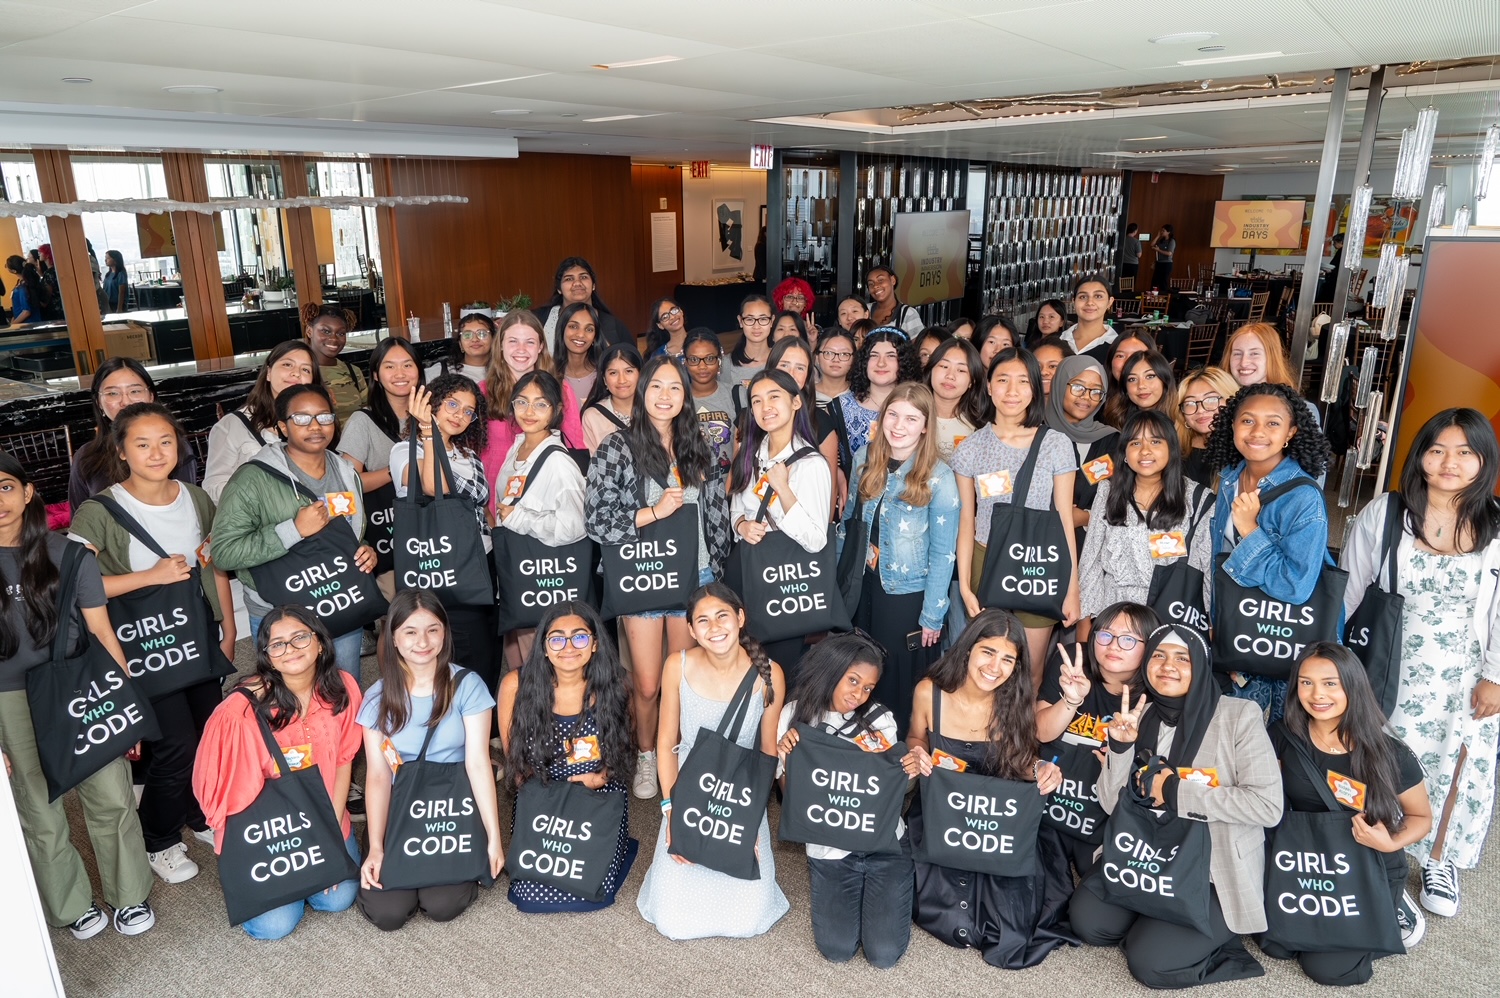 Girls Who Code Summer Program Immersion Day meets on Tuesday, July 25, 2023 at the Bank of America Headquarters in New York, NY. Students (6-12th grade) visit the host partner offices for a day of hands-on coding activities, breakout sessions, mentoring huddles and team building activities.